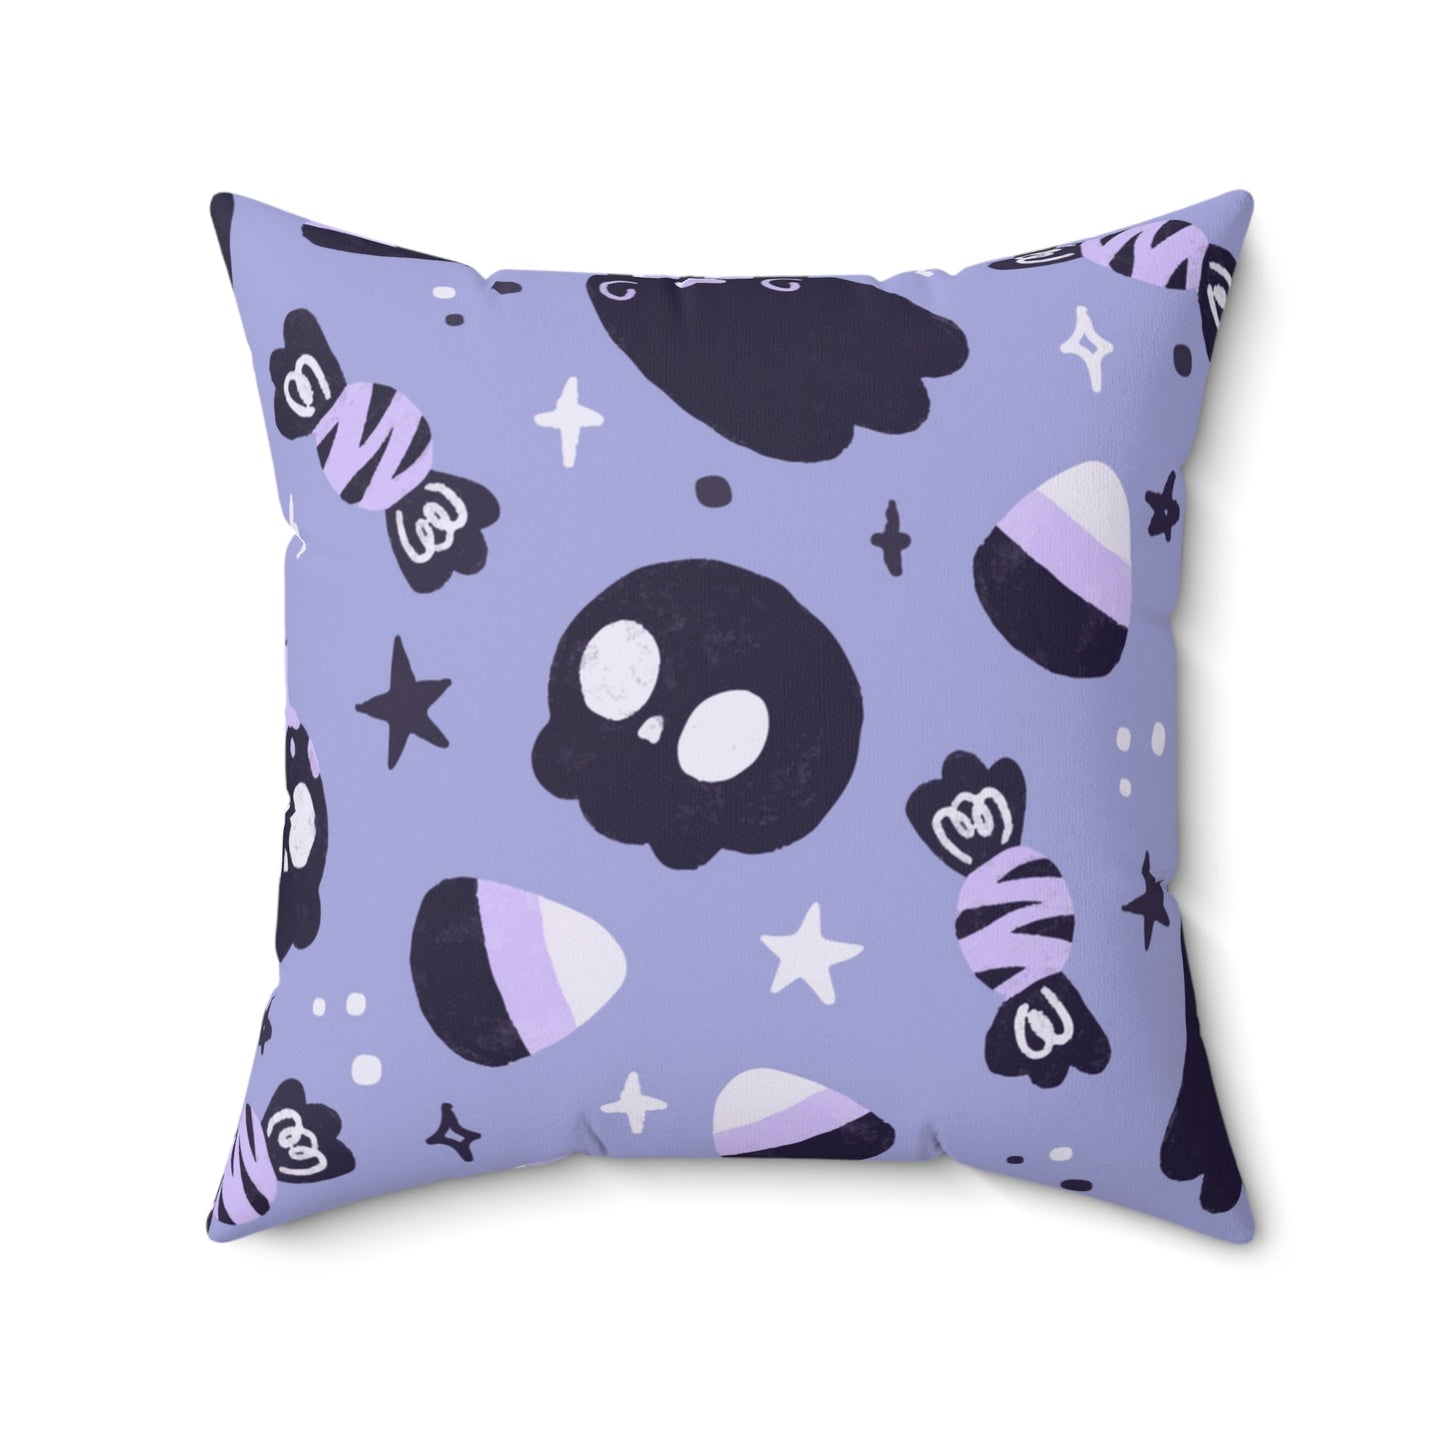 Holloween Fright Square Pillow Home Decor Pink Sweetheart